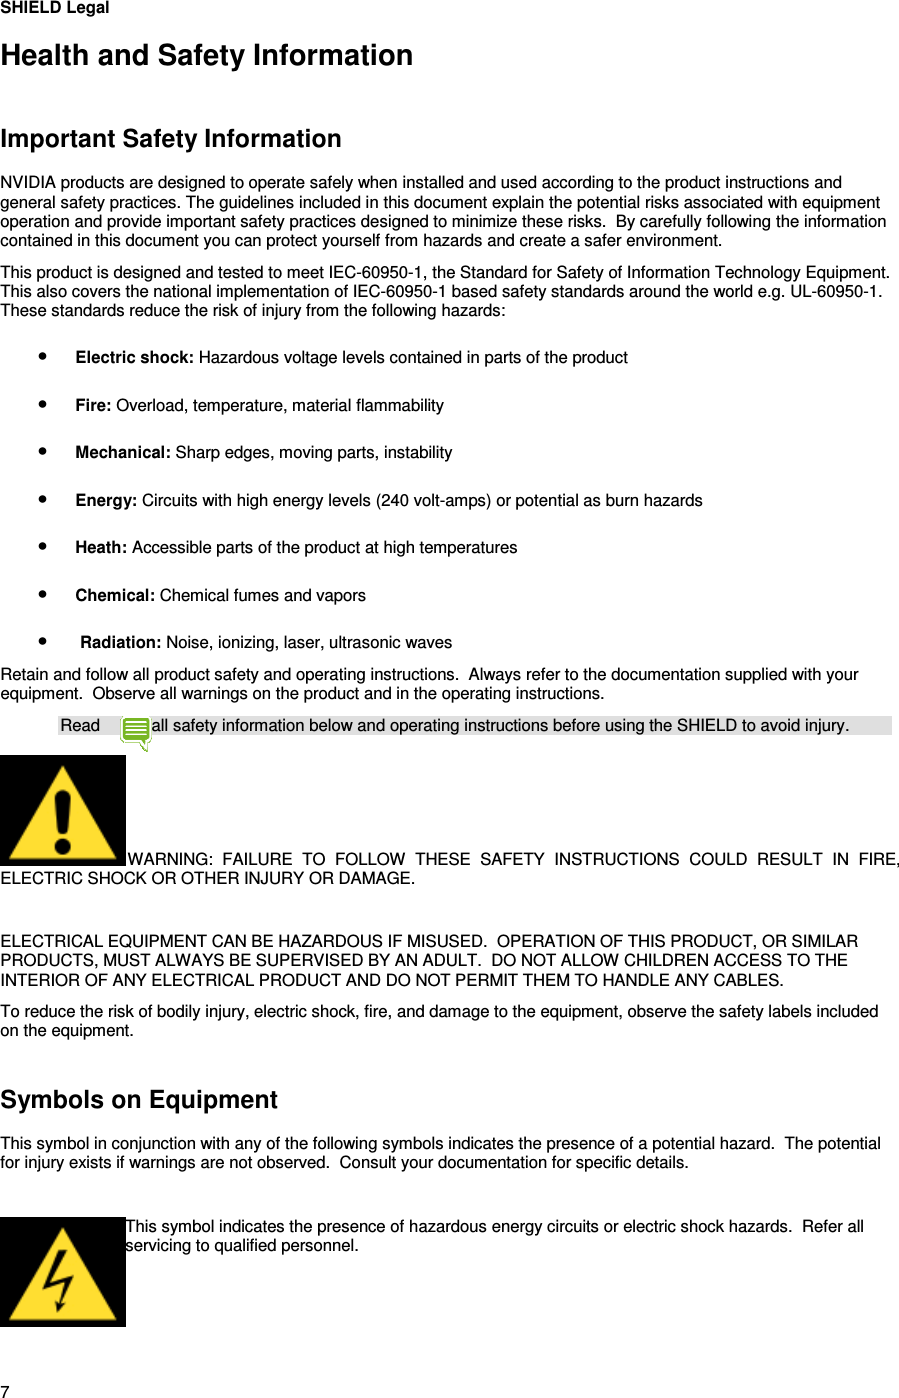 7 SHIELD Legal Health and Safety Information   Important Safety Information NVIDIA products are designed to operate safely when installed and used according to the product instructions and general safety practices. The guidelines included in this document explain the potential risks associated with equipment operation and provide important safety practices designed to minimize these risks.  By carefully following the information contained in this document you can protect yourself from hazards and create a safer environment.  This product is designed and tested to meet IEC-60950-1, the Standard for Safety of Information Technology Equipment. This also covers the national implementation of IEC-60950-1 based safety standards around the world e.g. UL-60950-1. These standards reduce the risk of injury from the following hazards: • Electric shock: Hazardous voltage levels contained in parts of the product • Fire: Overload, temperature, material flammability • Mechanical: Sharp edges, moving parts, instability • Energy: Circuits with high energy levels (240 volt-amps) or potential as burn hazards • Heath: Accessible parts of the product at high temperatures • Chemical: Chemical fumes and vapors •  Radiation: Noise, ionizing, laser, ultrasonic waves Retain and follow all product safety and operating instructions.  Always refer to the documentation supplied with your equipment.  Observe all warnings on the product and in the operating instructions. Read  all safety information below and operating instructions before using the SHIELD to avoid injury. WARNING:  FAILURE  TO  FOLLOW  THESE  SAFETY  INSTRUCTIONS  COULD  RESULT  IN  FIRE, ELECTRIC SHOCK OR OTHER INJURY OR DAMAGE.   ELECTRICAL EQUIPMENT CAN BE HAZARDOUS IF MISUSED.  OPERATION OF THIS PRODUCT, OR SIMILAR PRODUCTS, MUST ALWAYS BE SUPERVISED BY AN ADULT.  DO NOT ALLOW CHILDREN ACCESS TO THE INTERIOR OF ANY ELECTRICAL PRODUCT AND DO NOT PERMIT THEM TO HANDLE ANY CABLES. To reduce the risk of bodily injury, electric shock, fire, and damage to the equipment, observe the safety labels included on the equipment.   Symbols on Equipment This symbol in conjunction with any of the following symbols indicates the presence of a potential hazard.  The potential for injury exists if warnings are not observed.  Consult your documentation for specific details.   This symbol indicates the presence of hazardous energy circuits or electric shock hazards.  Refer all servicing to qualified personnel.     